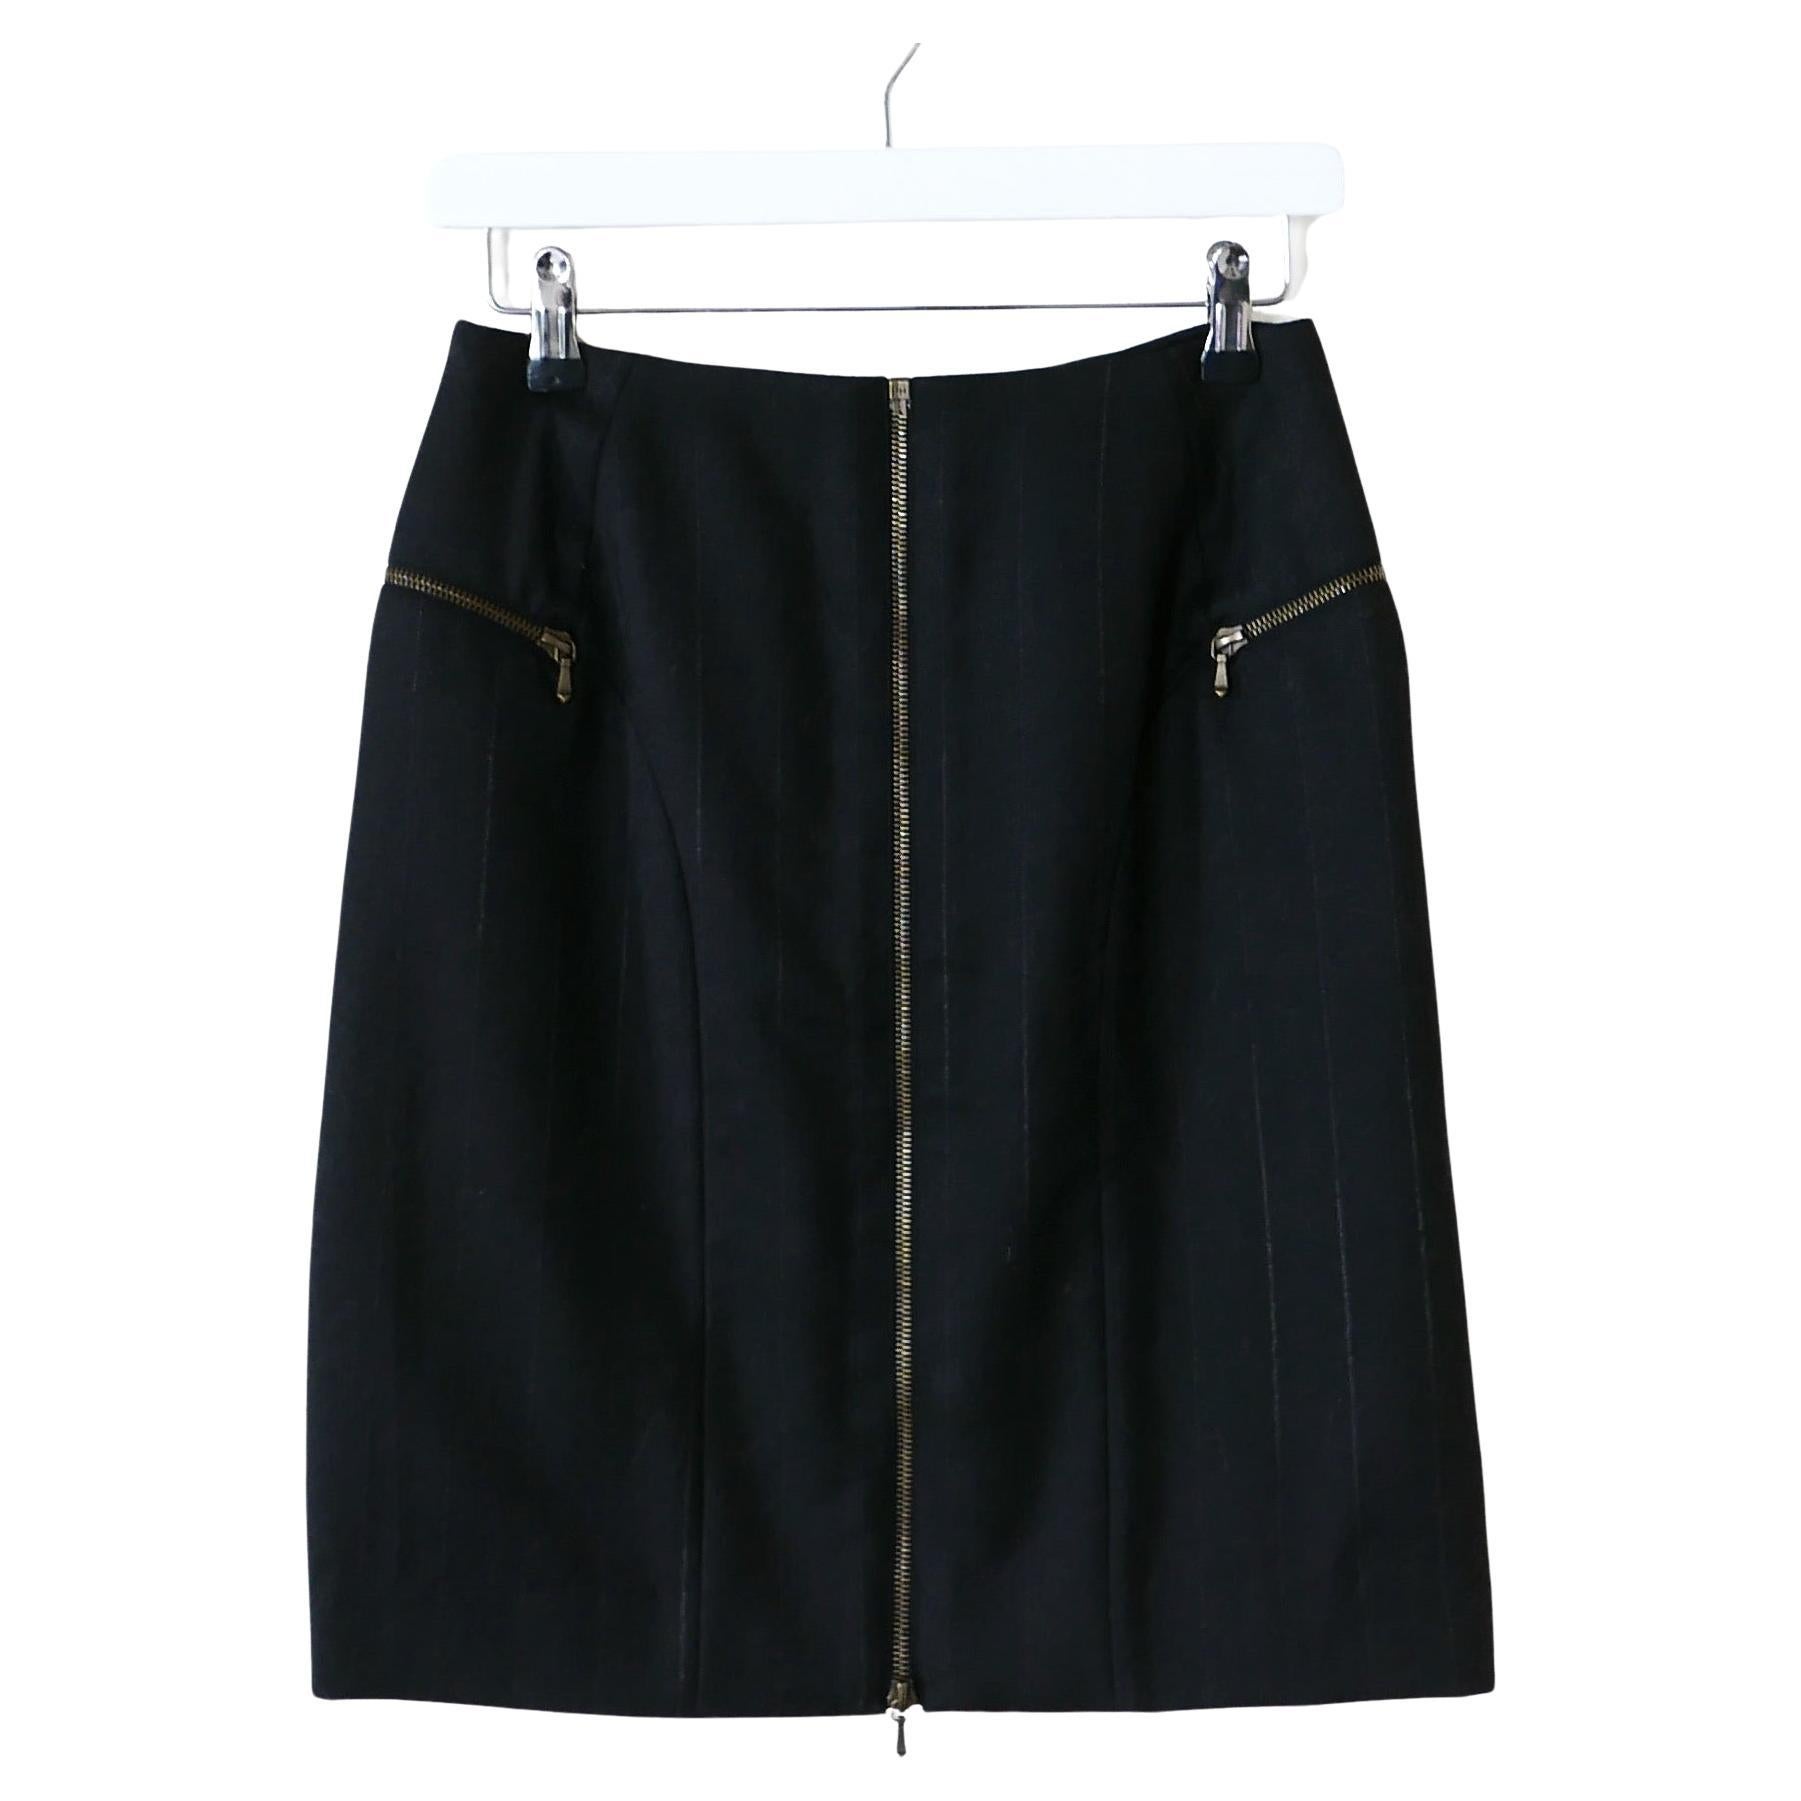 Christian Dior x Galliano AW00 Zip Front Pinstripe Pencil Skirt For Sale